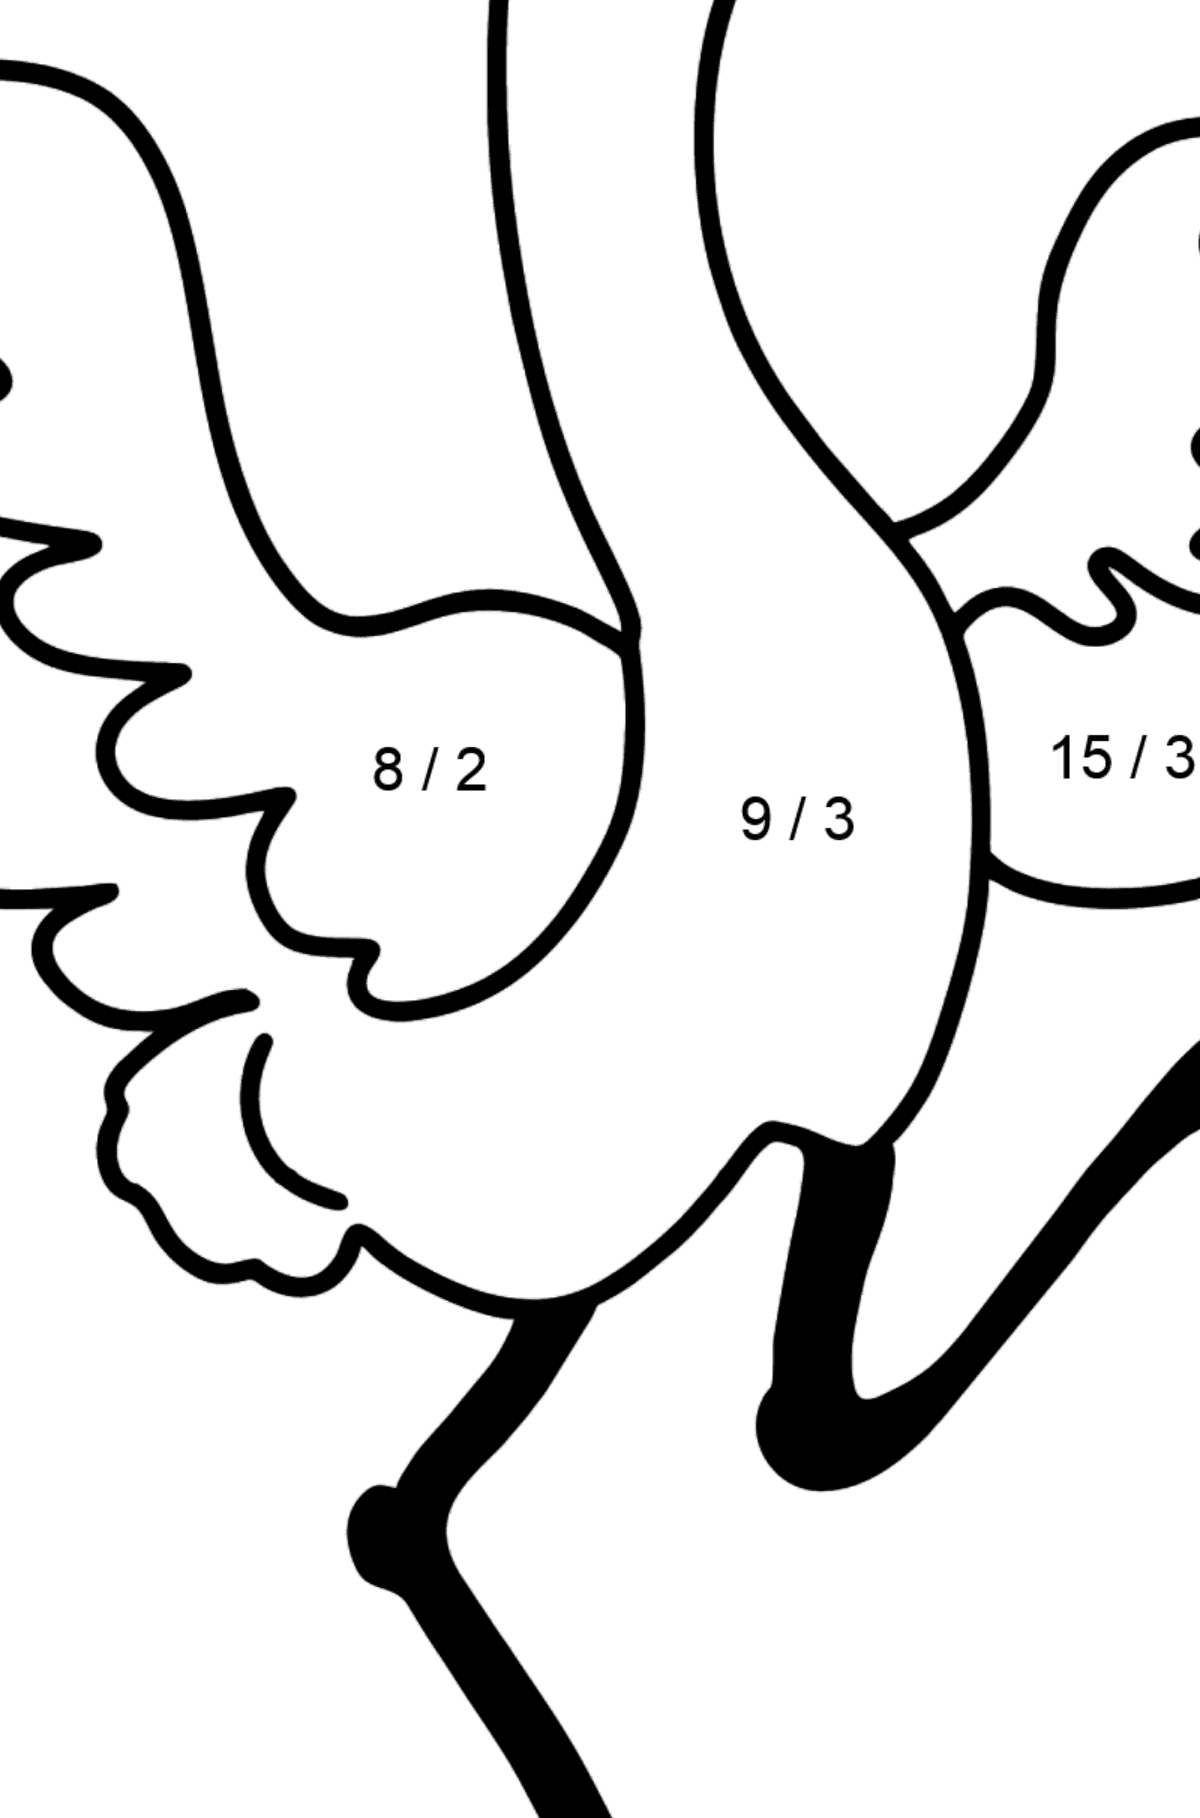 Crane coloring page - Math Coloring - Division for Kids